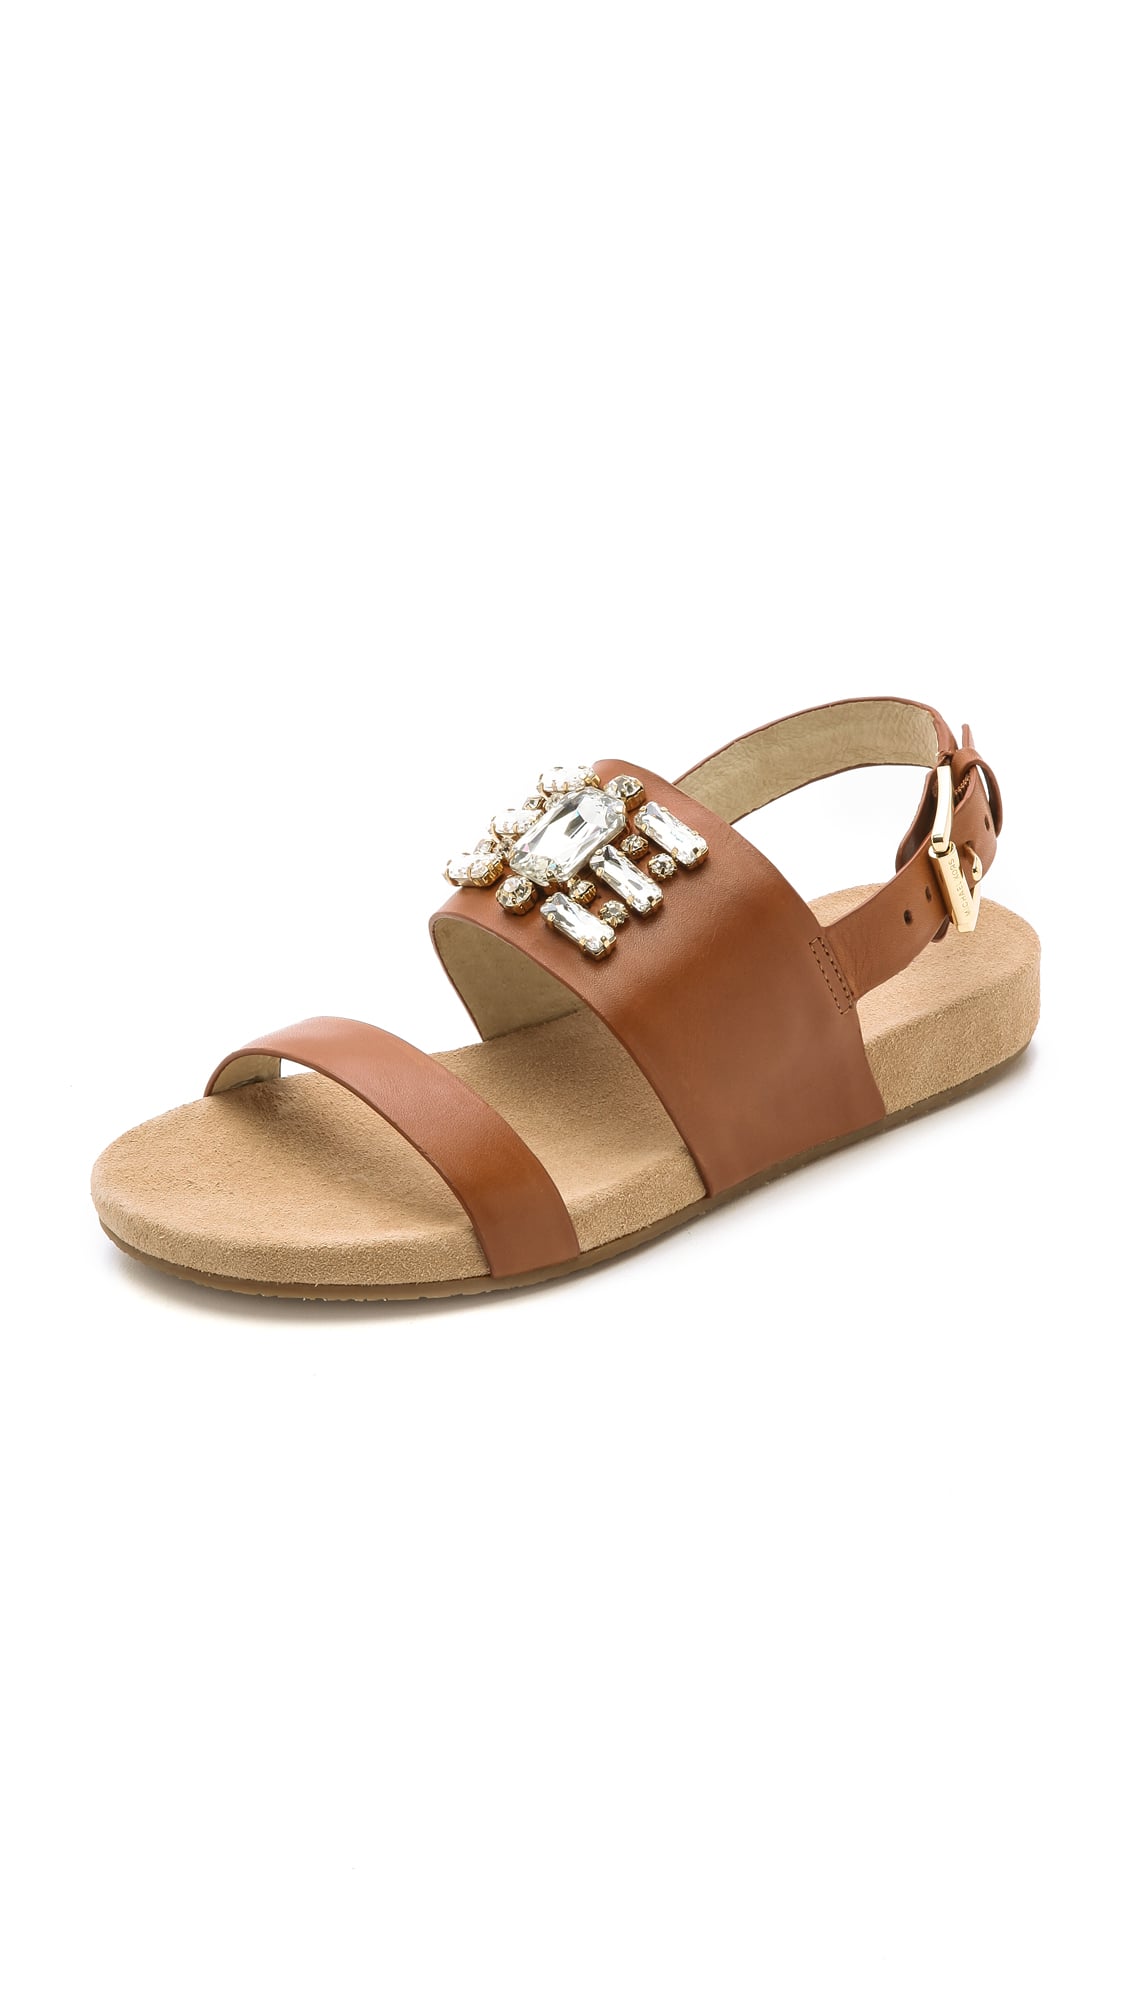 Michael Michael Kors Flat Sandals | Sandals That Look Great — and Even Better | POPSUGAR Fashion Photo